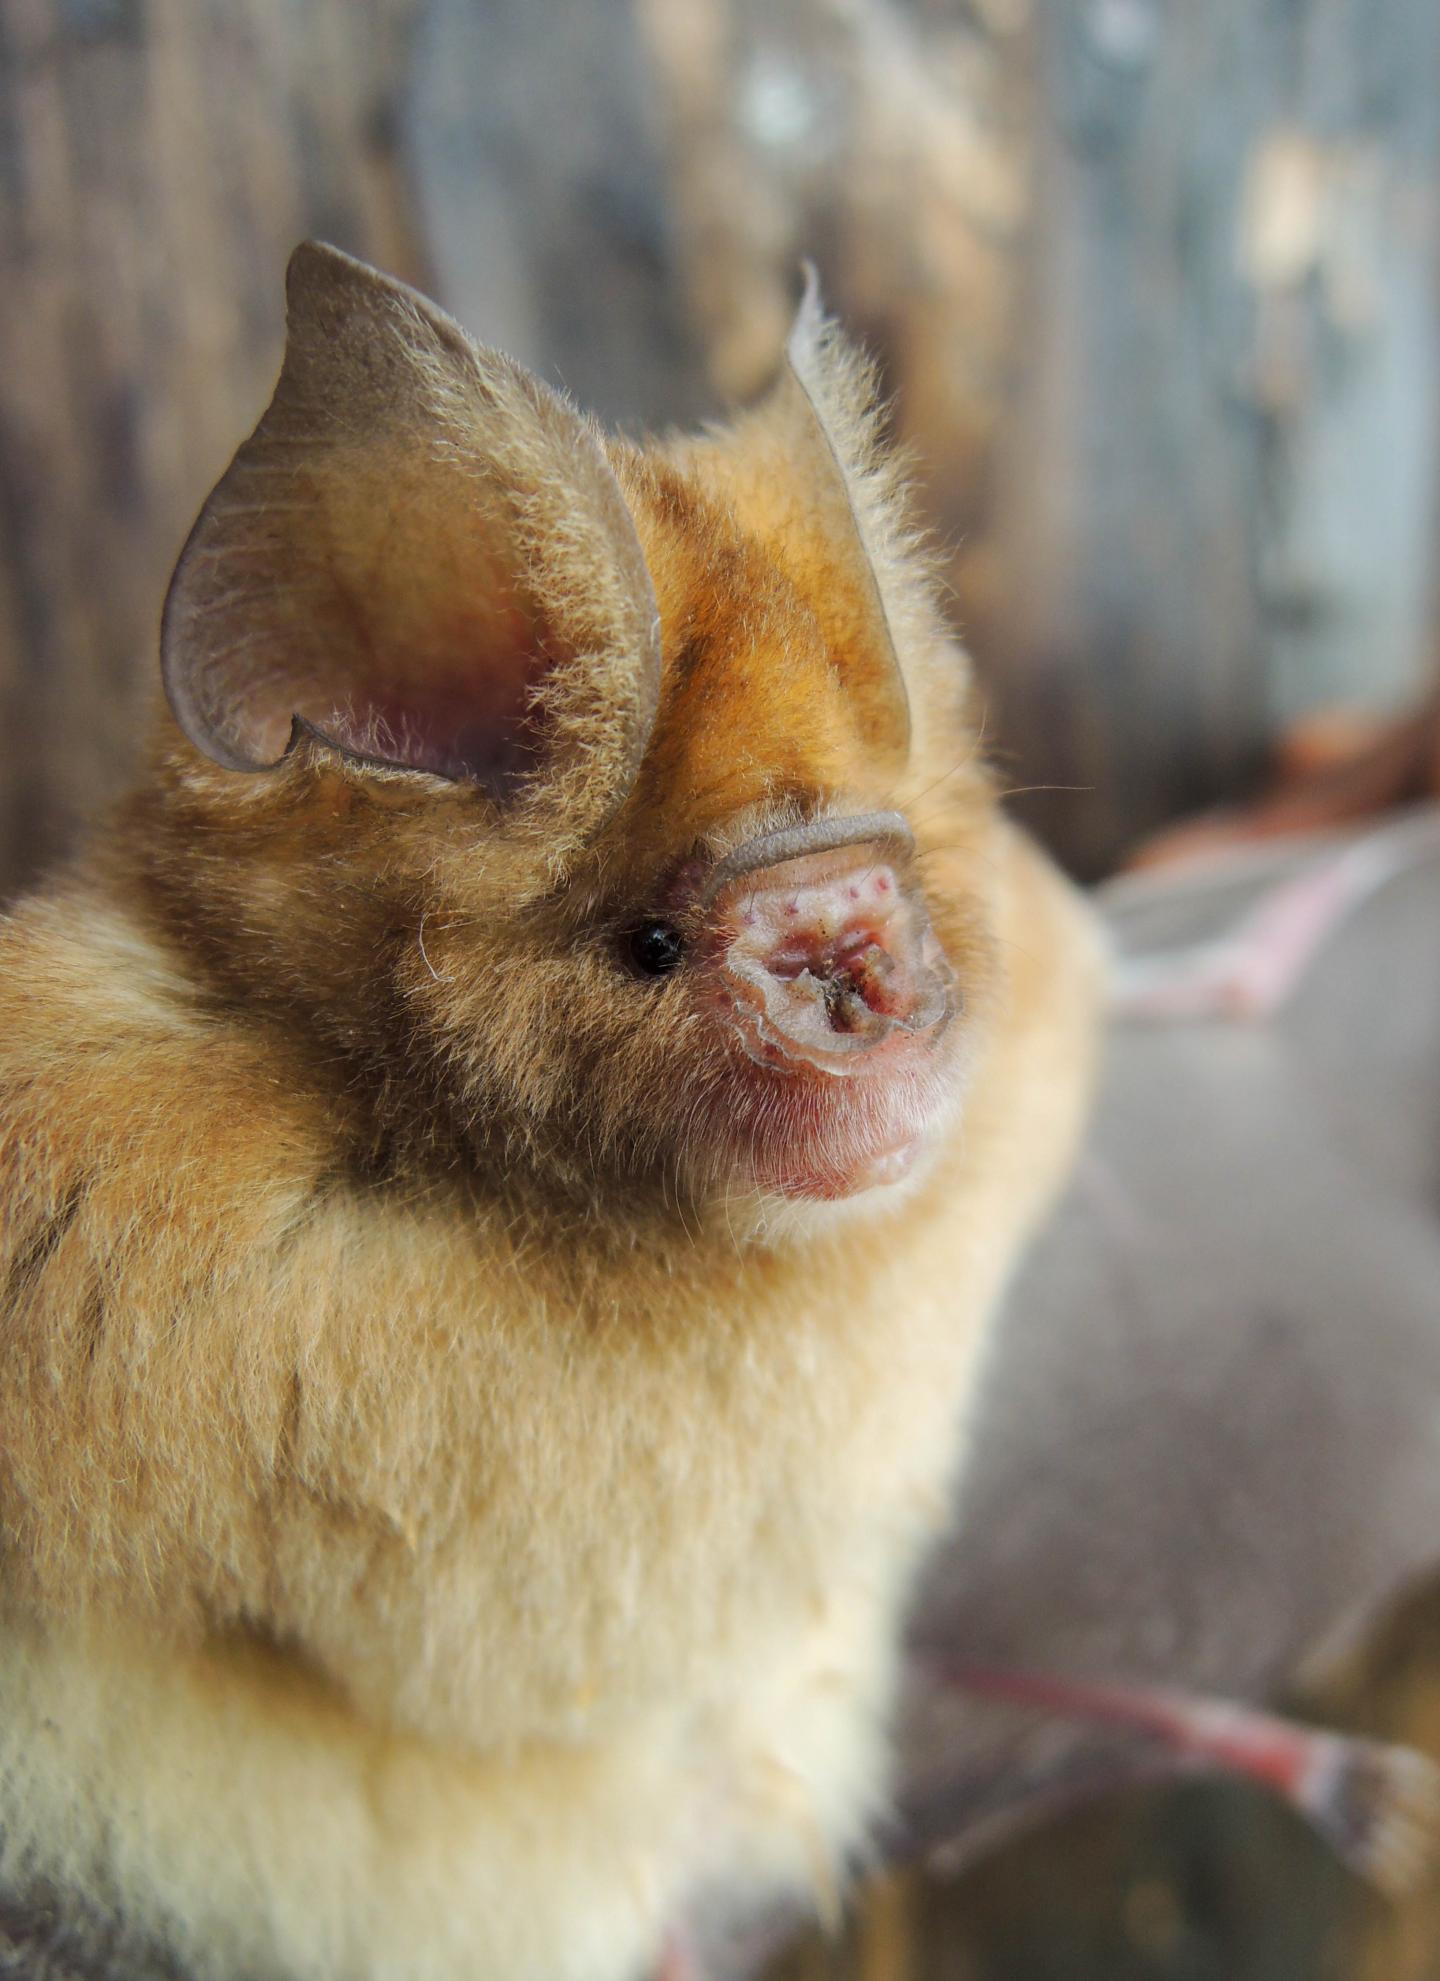 One of the Possibly Three New to Science Bat Species